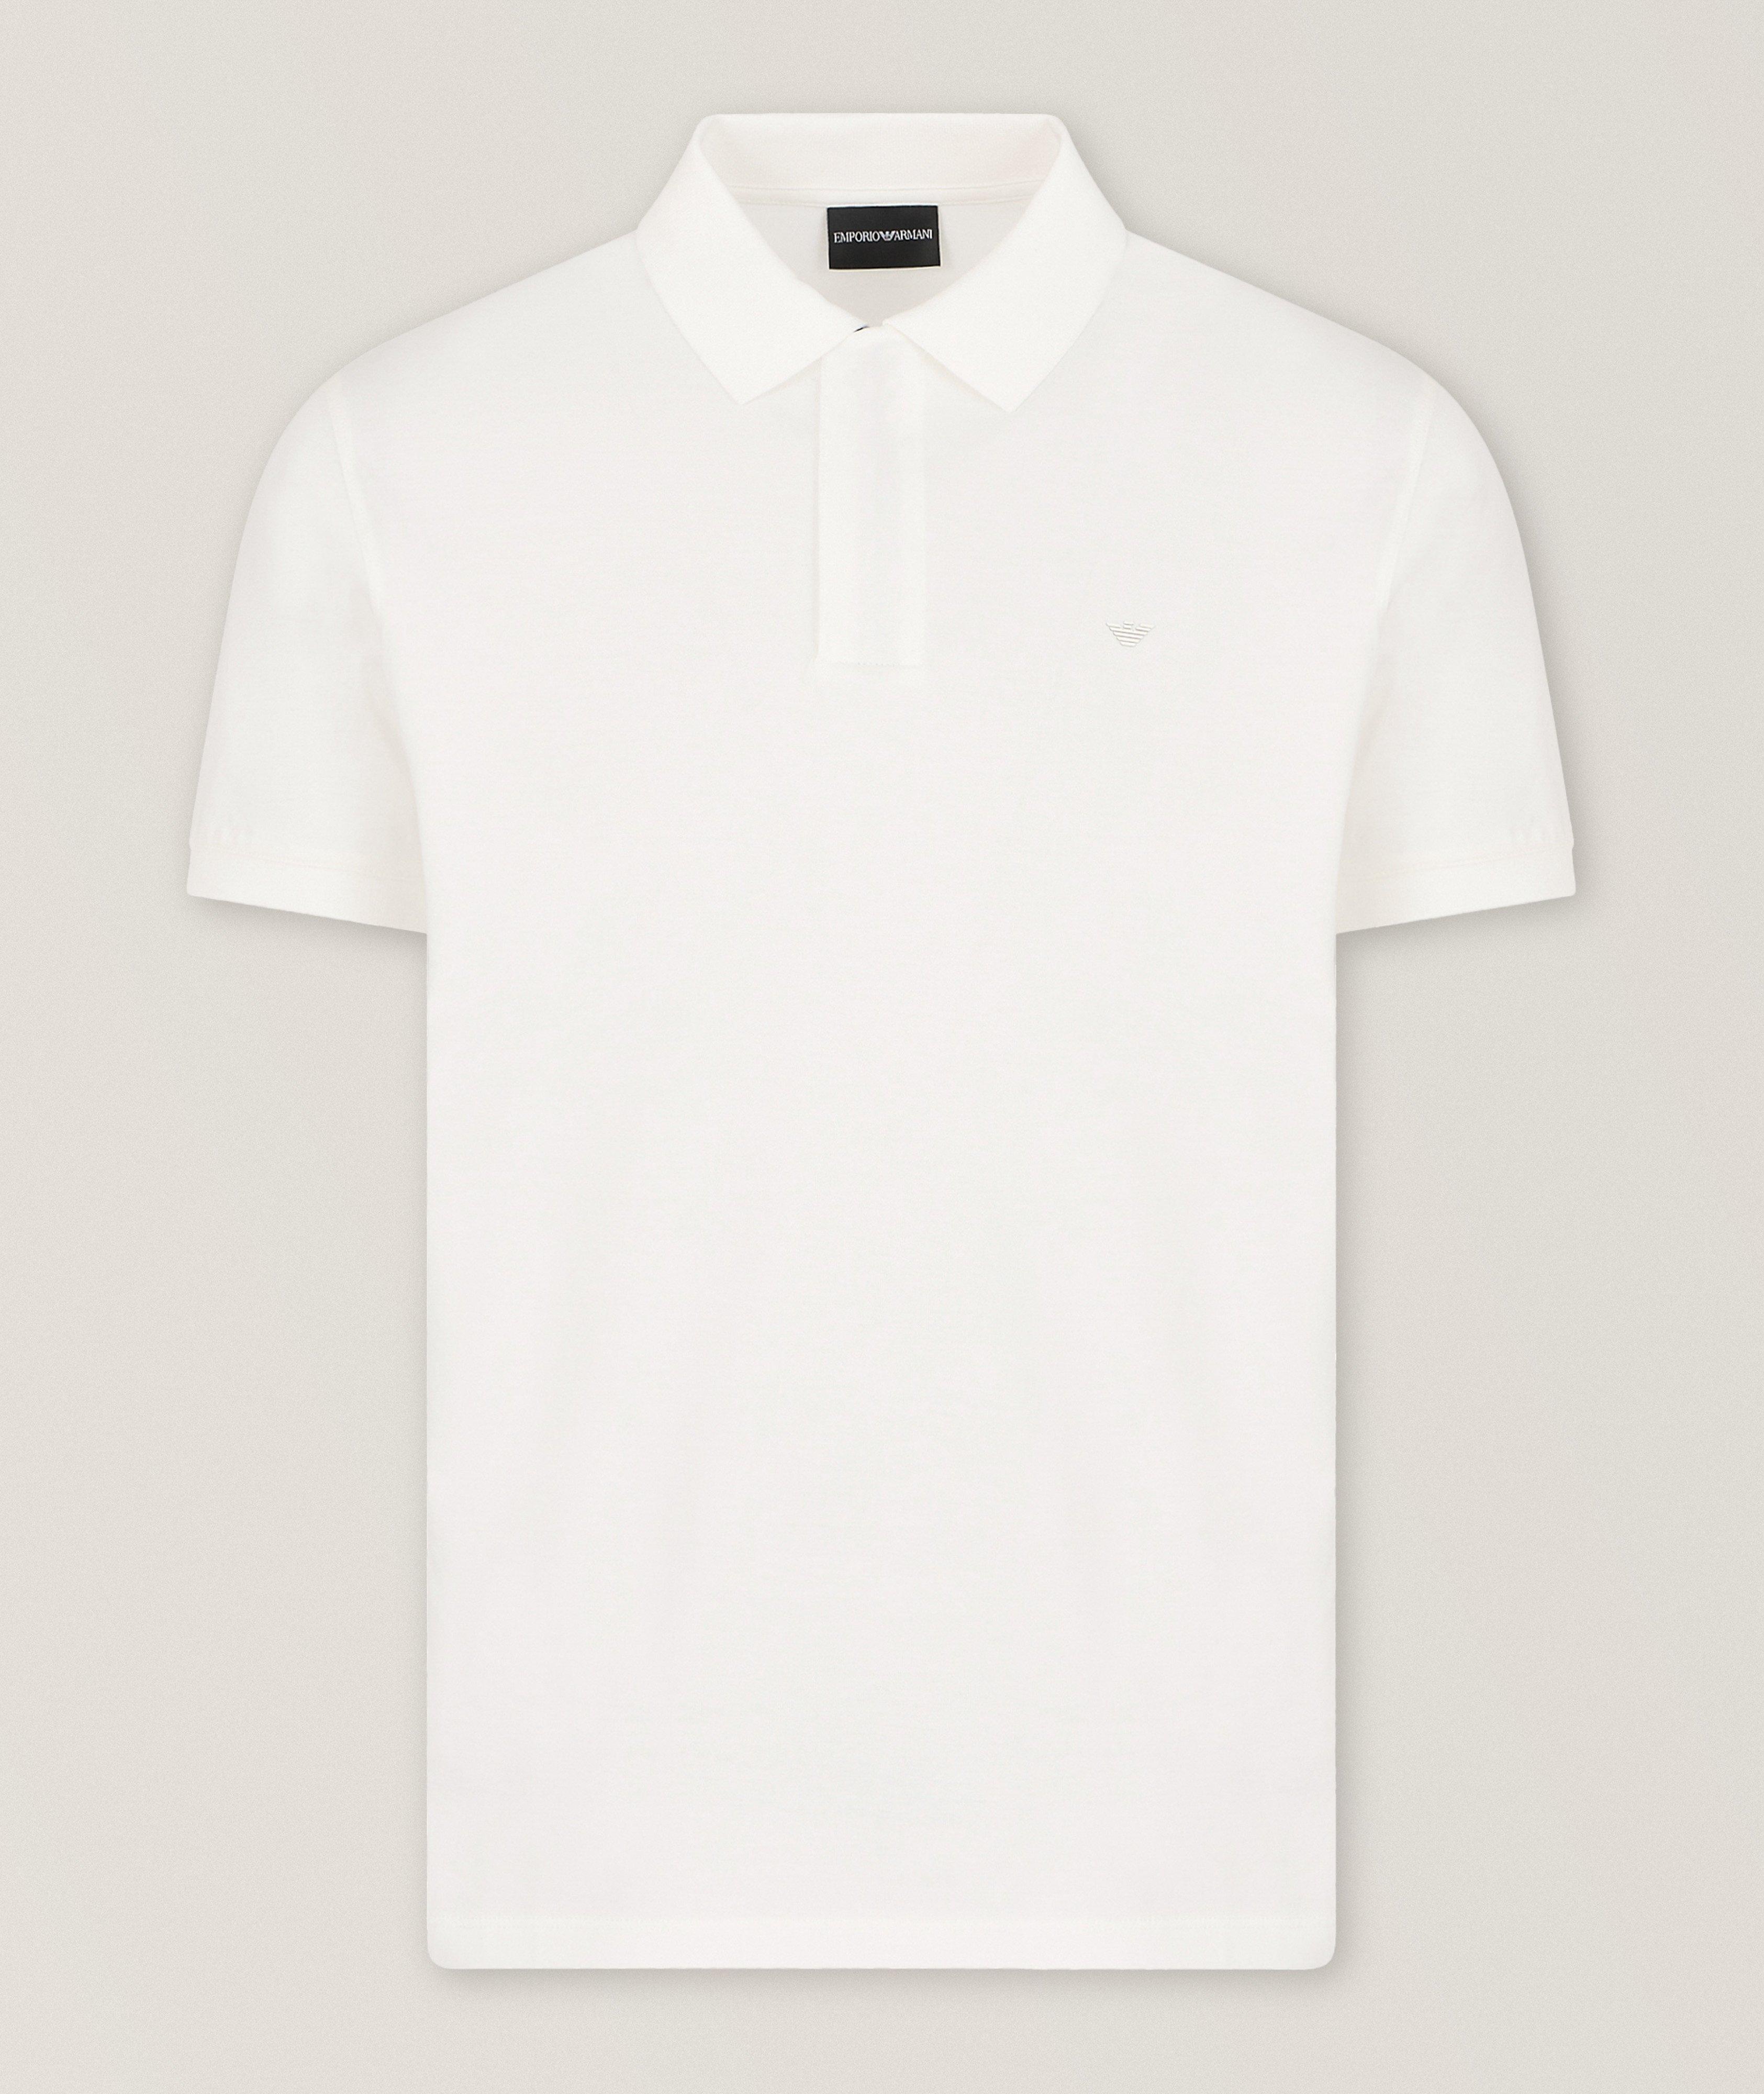 Concealed Zipper Polo image 0